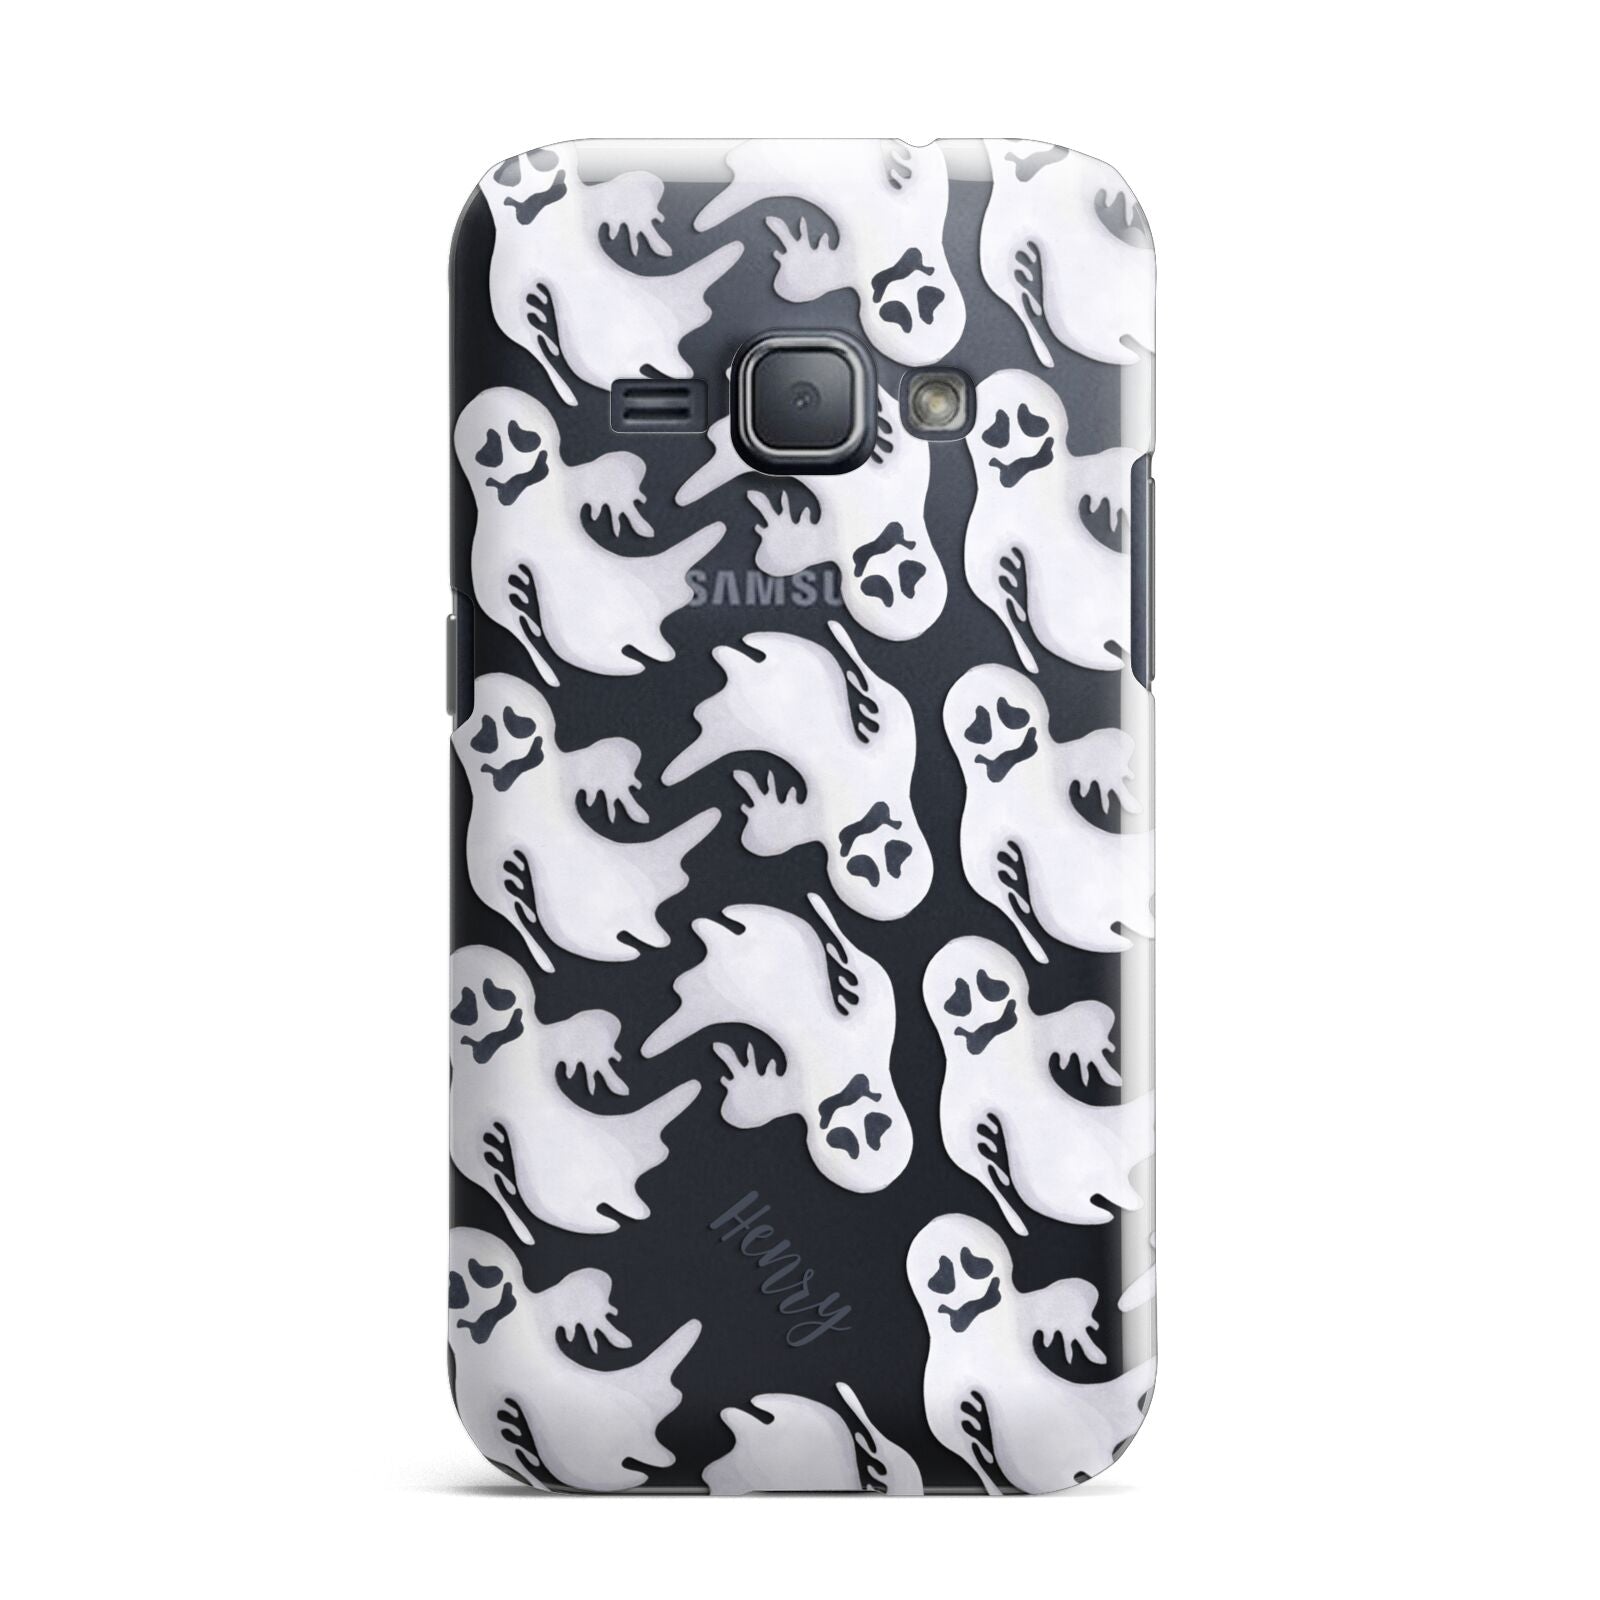 Floaty Ghosts Personalised Samsung Galaxy J1 2016 Case